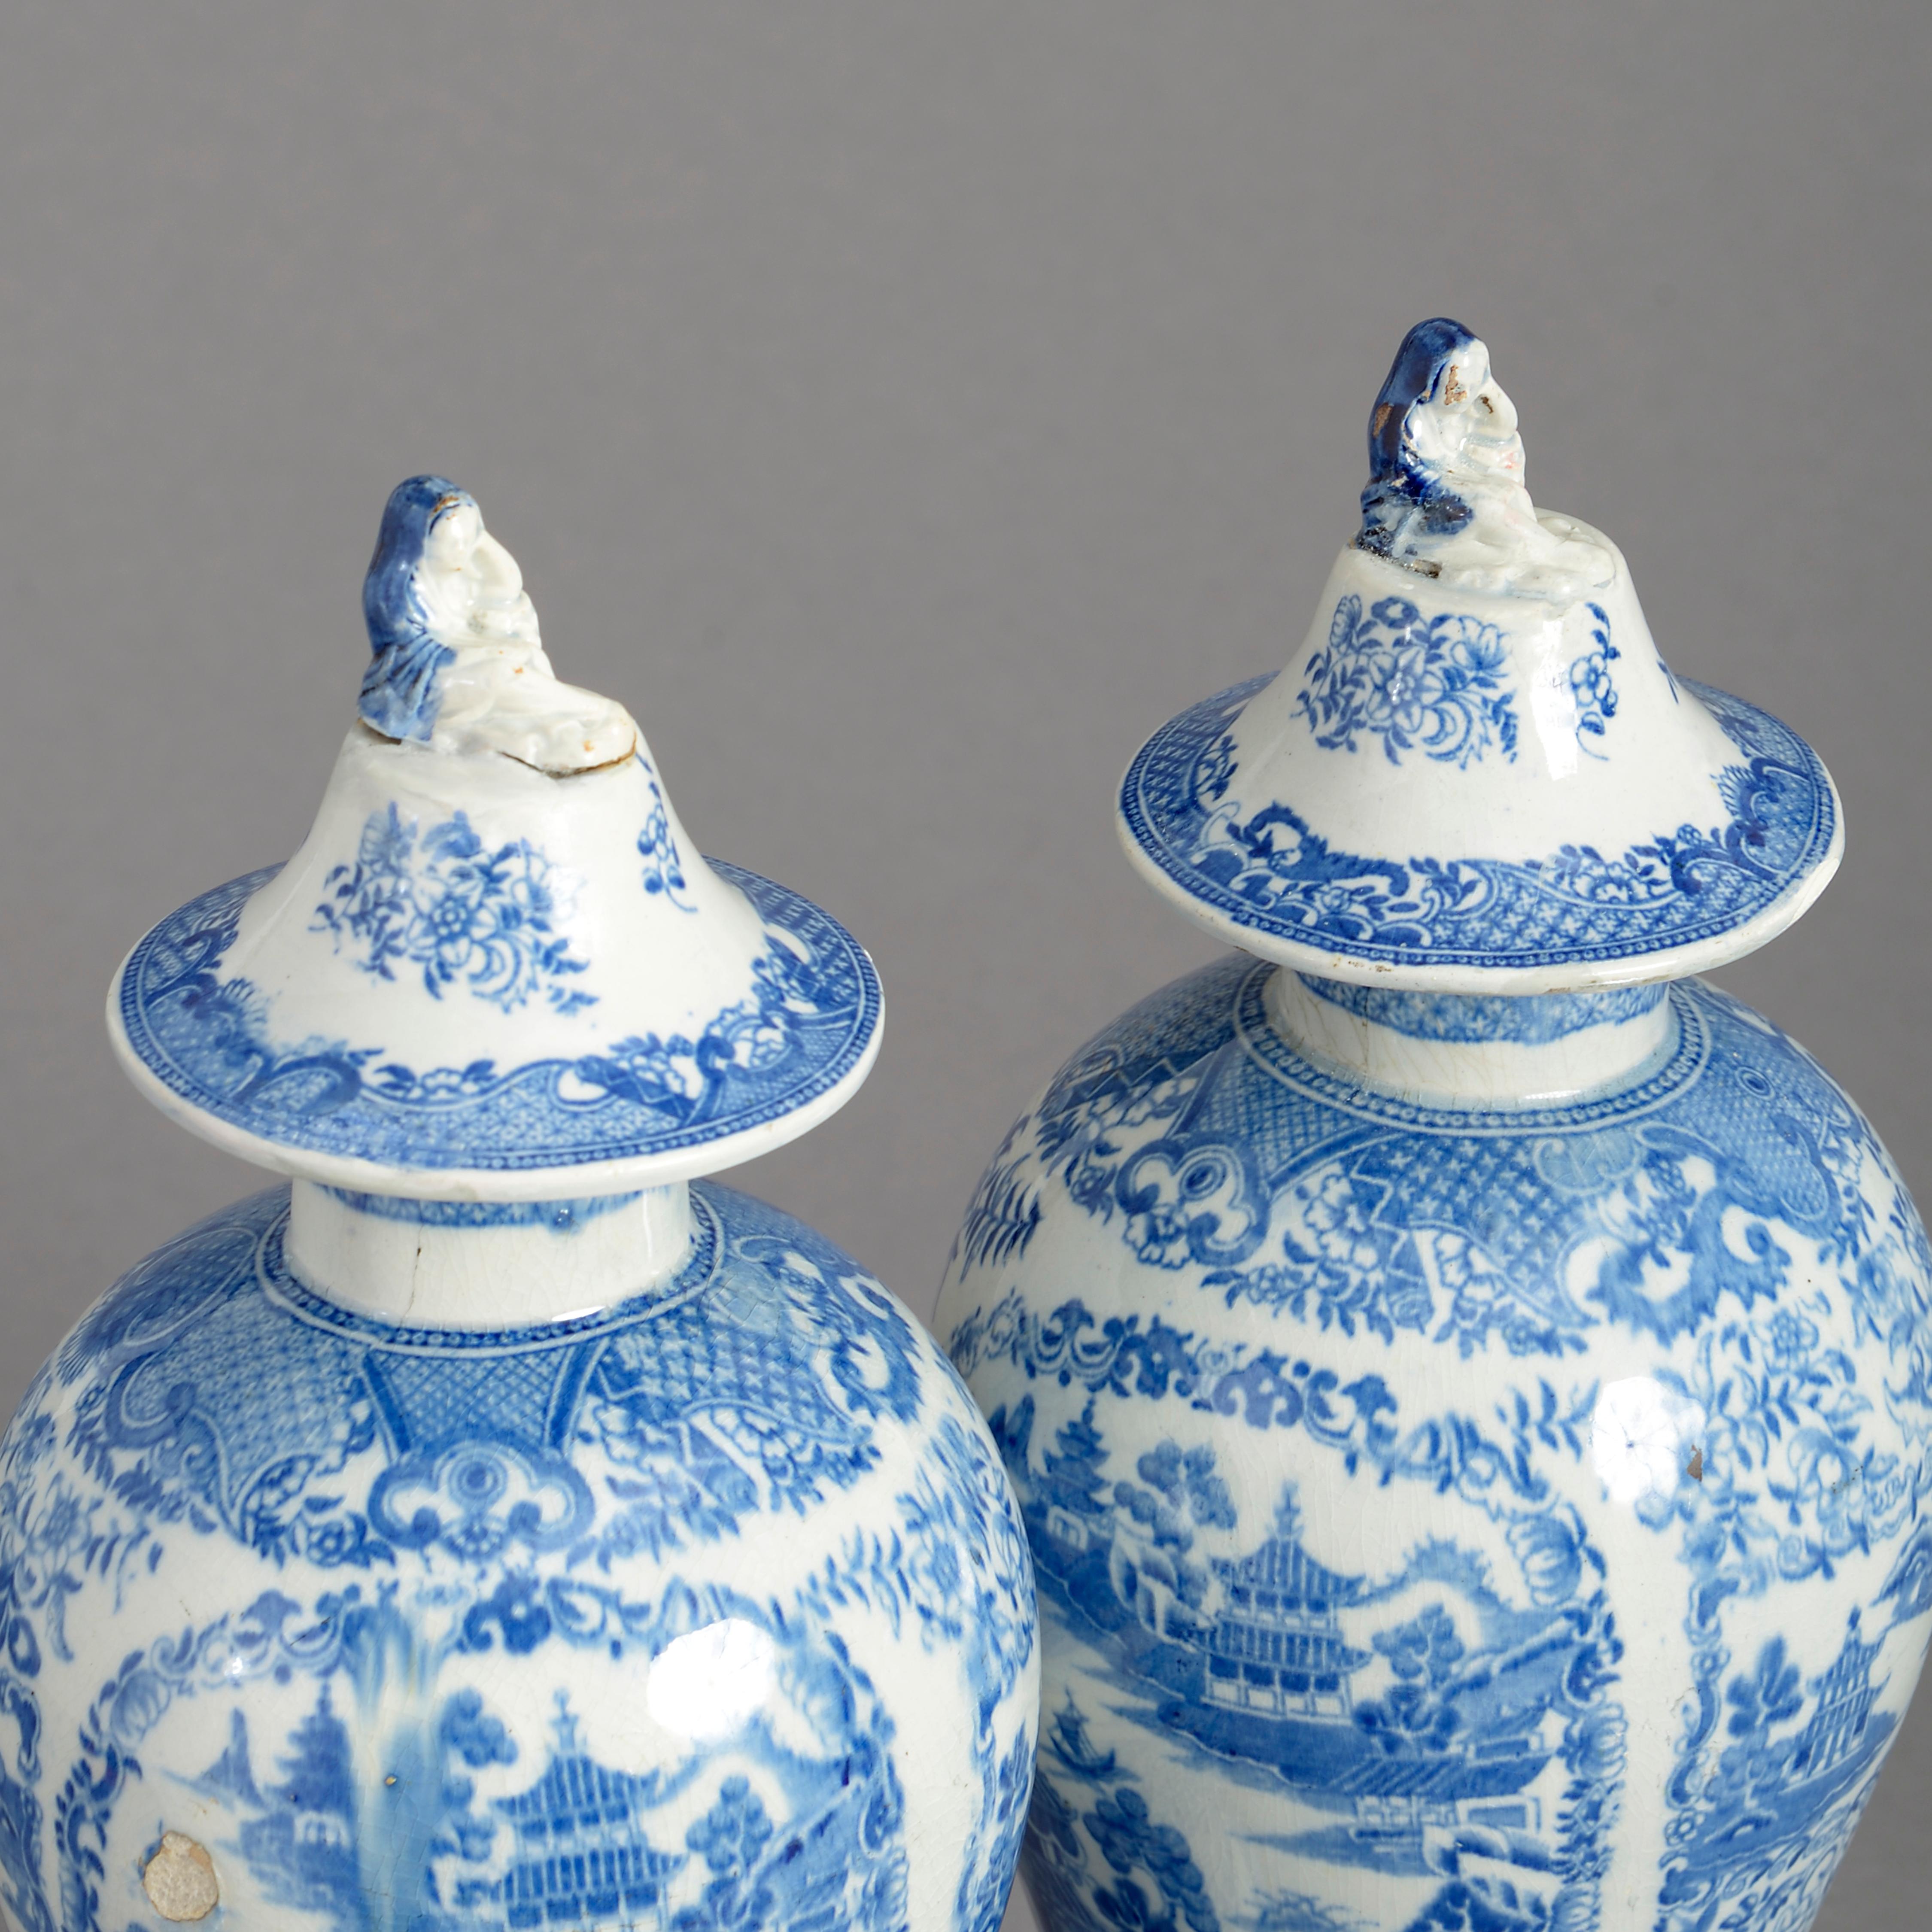 Fired Pair of 18th Century Blue and White Staffordshire Pottery Vases and Covers